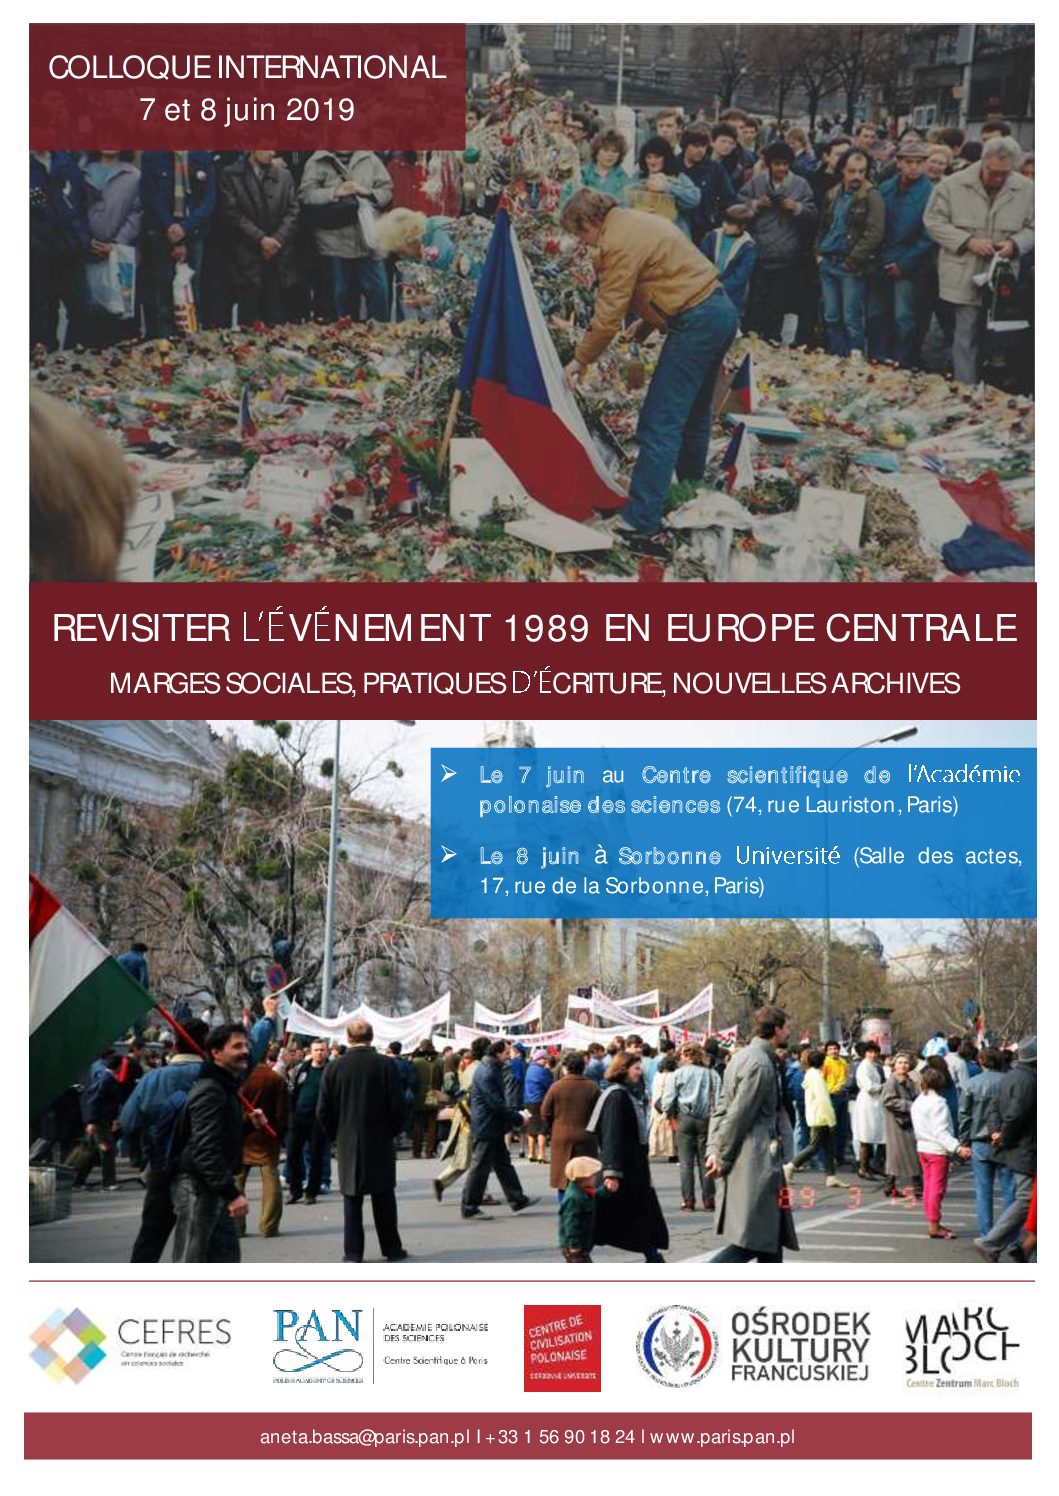 Revisiting the 1989 event in Central Europe: social margins, writing practices, new archives